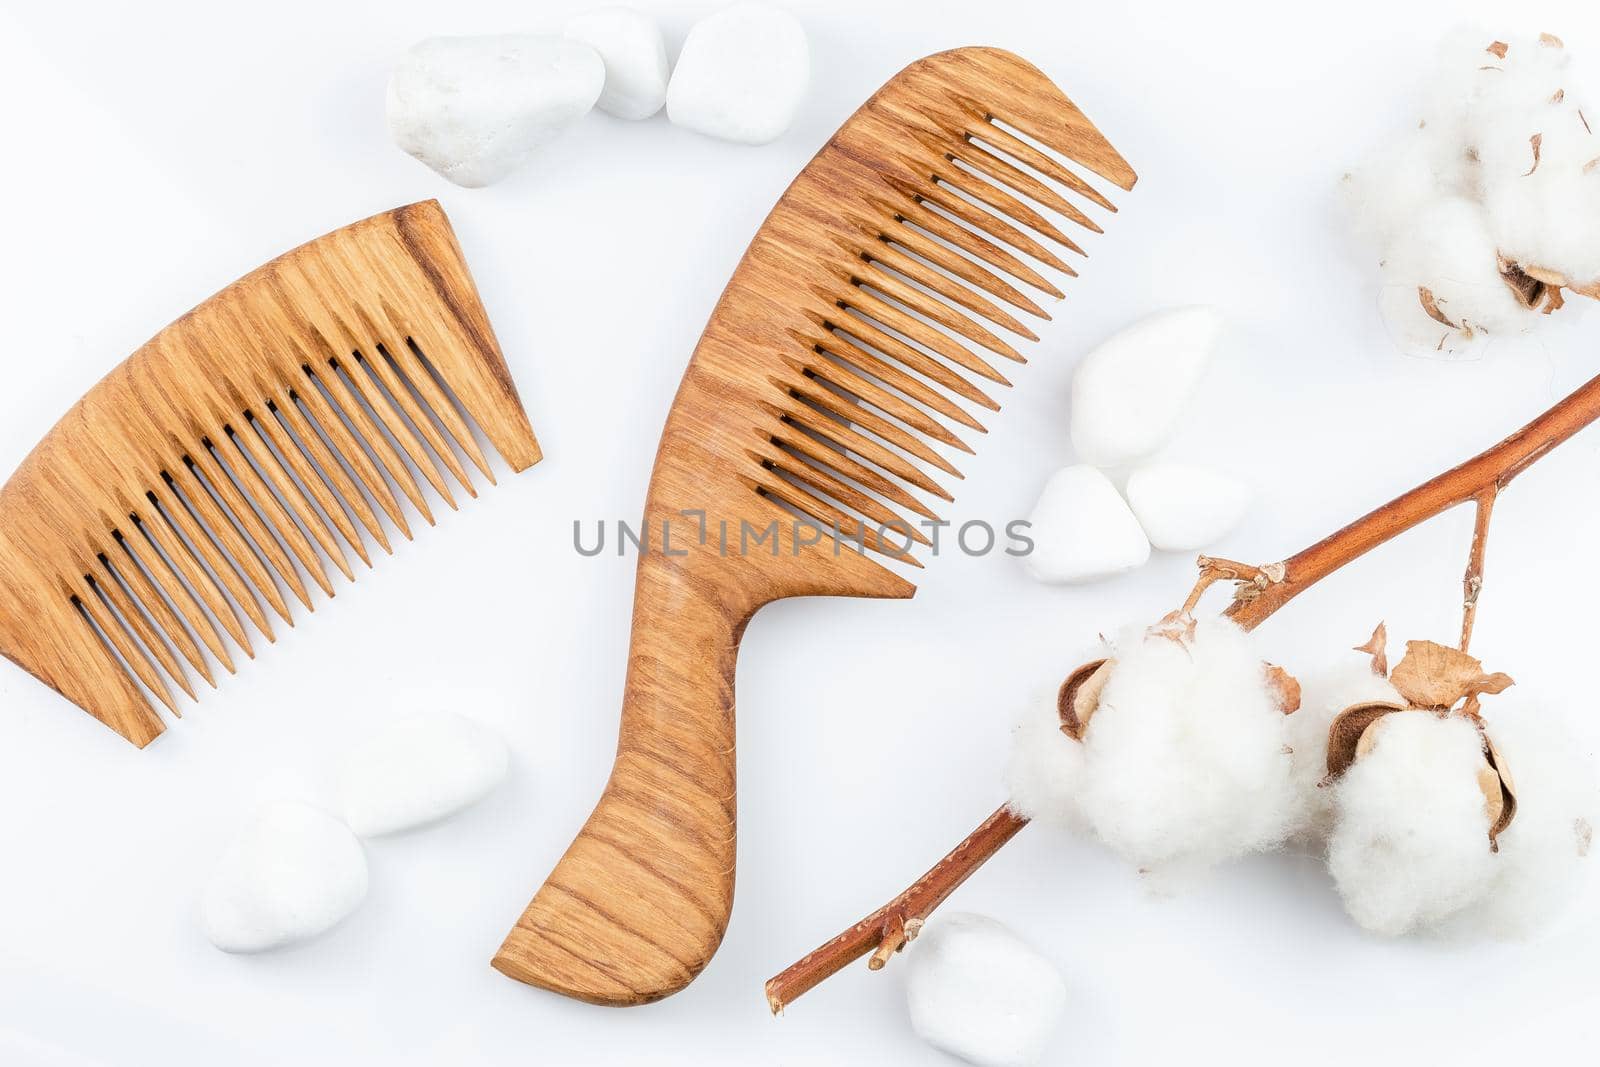 Wooden hair combs on a white background. Personal care, zero waste, sustainable lifestyle